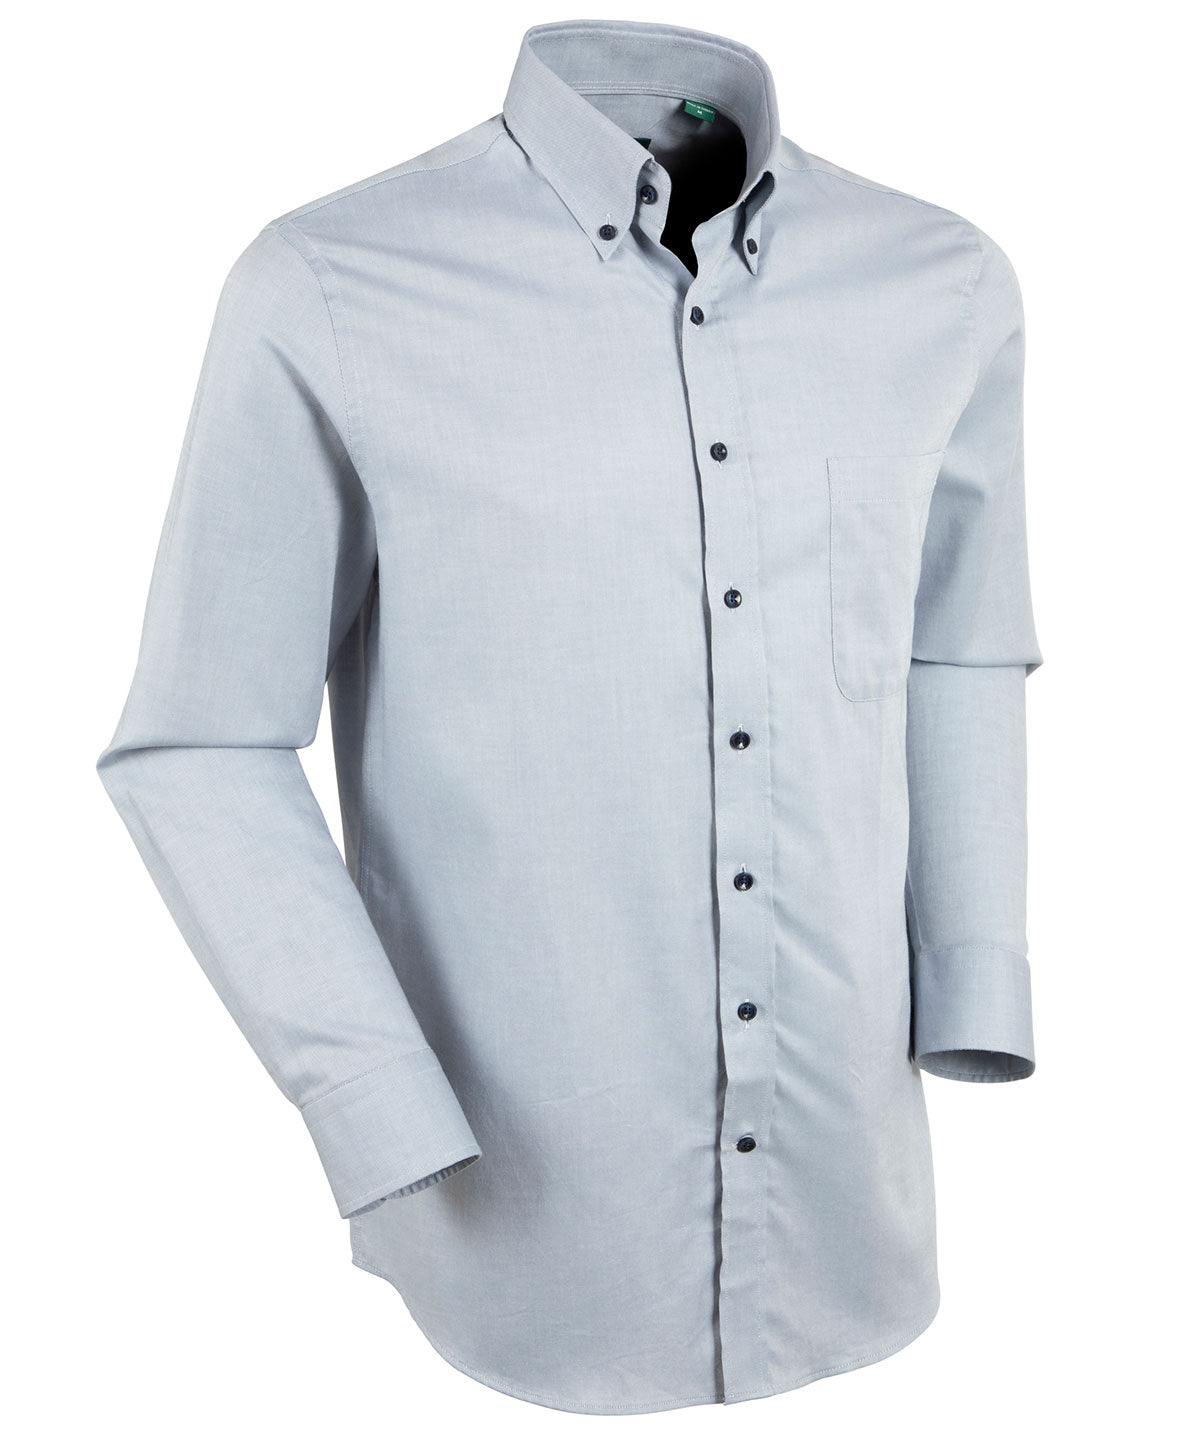 Signature Oxford Long Sleeve Sport Shirt with Contrast Buttons - Trim Fit